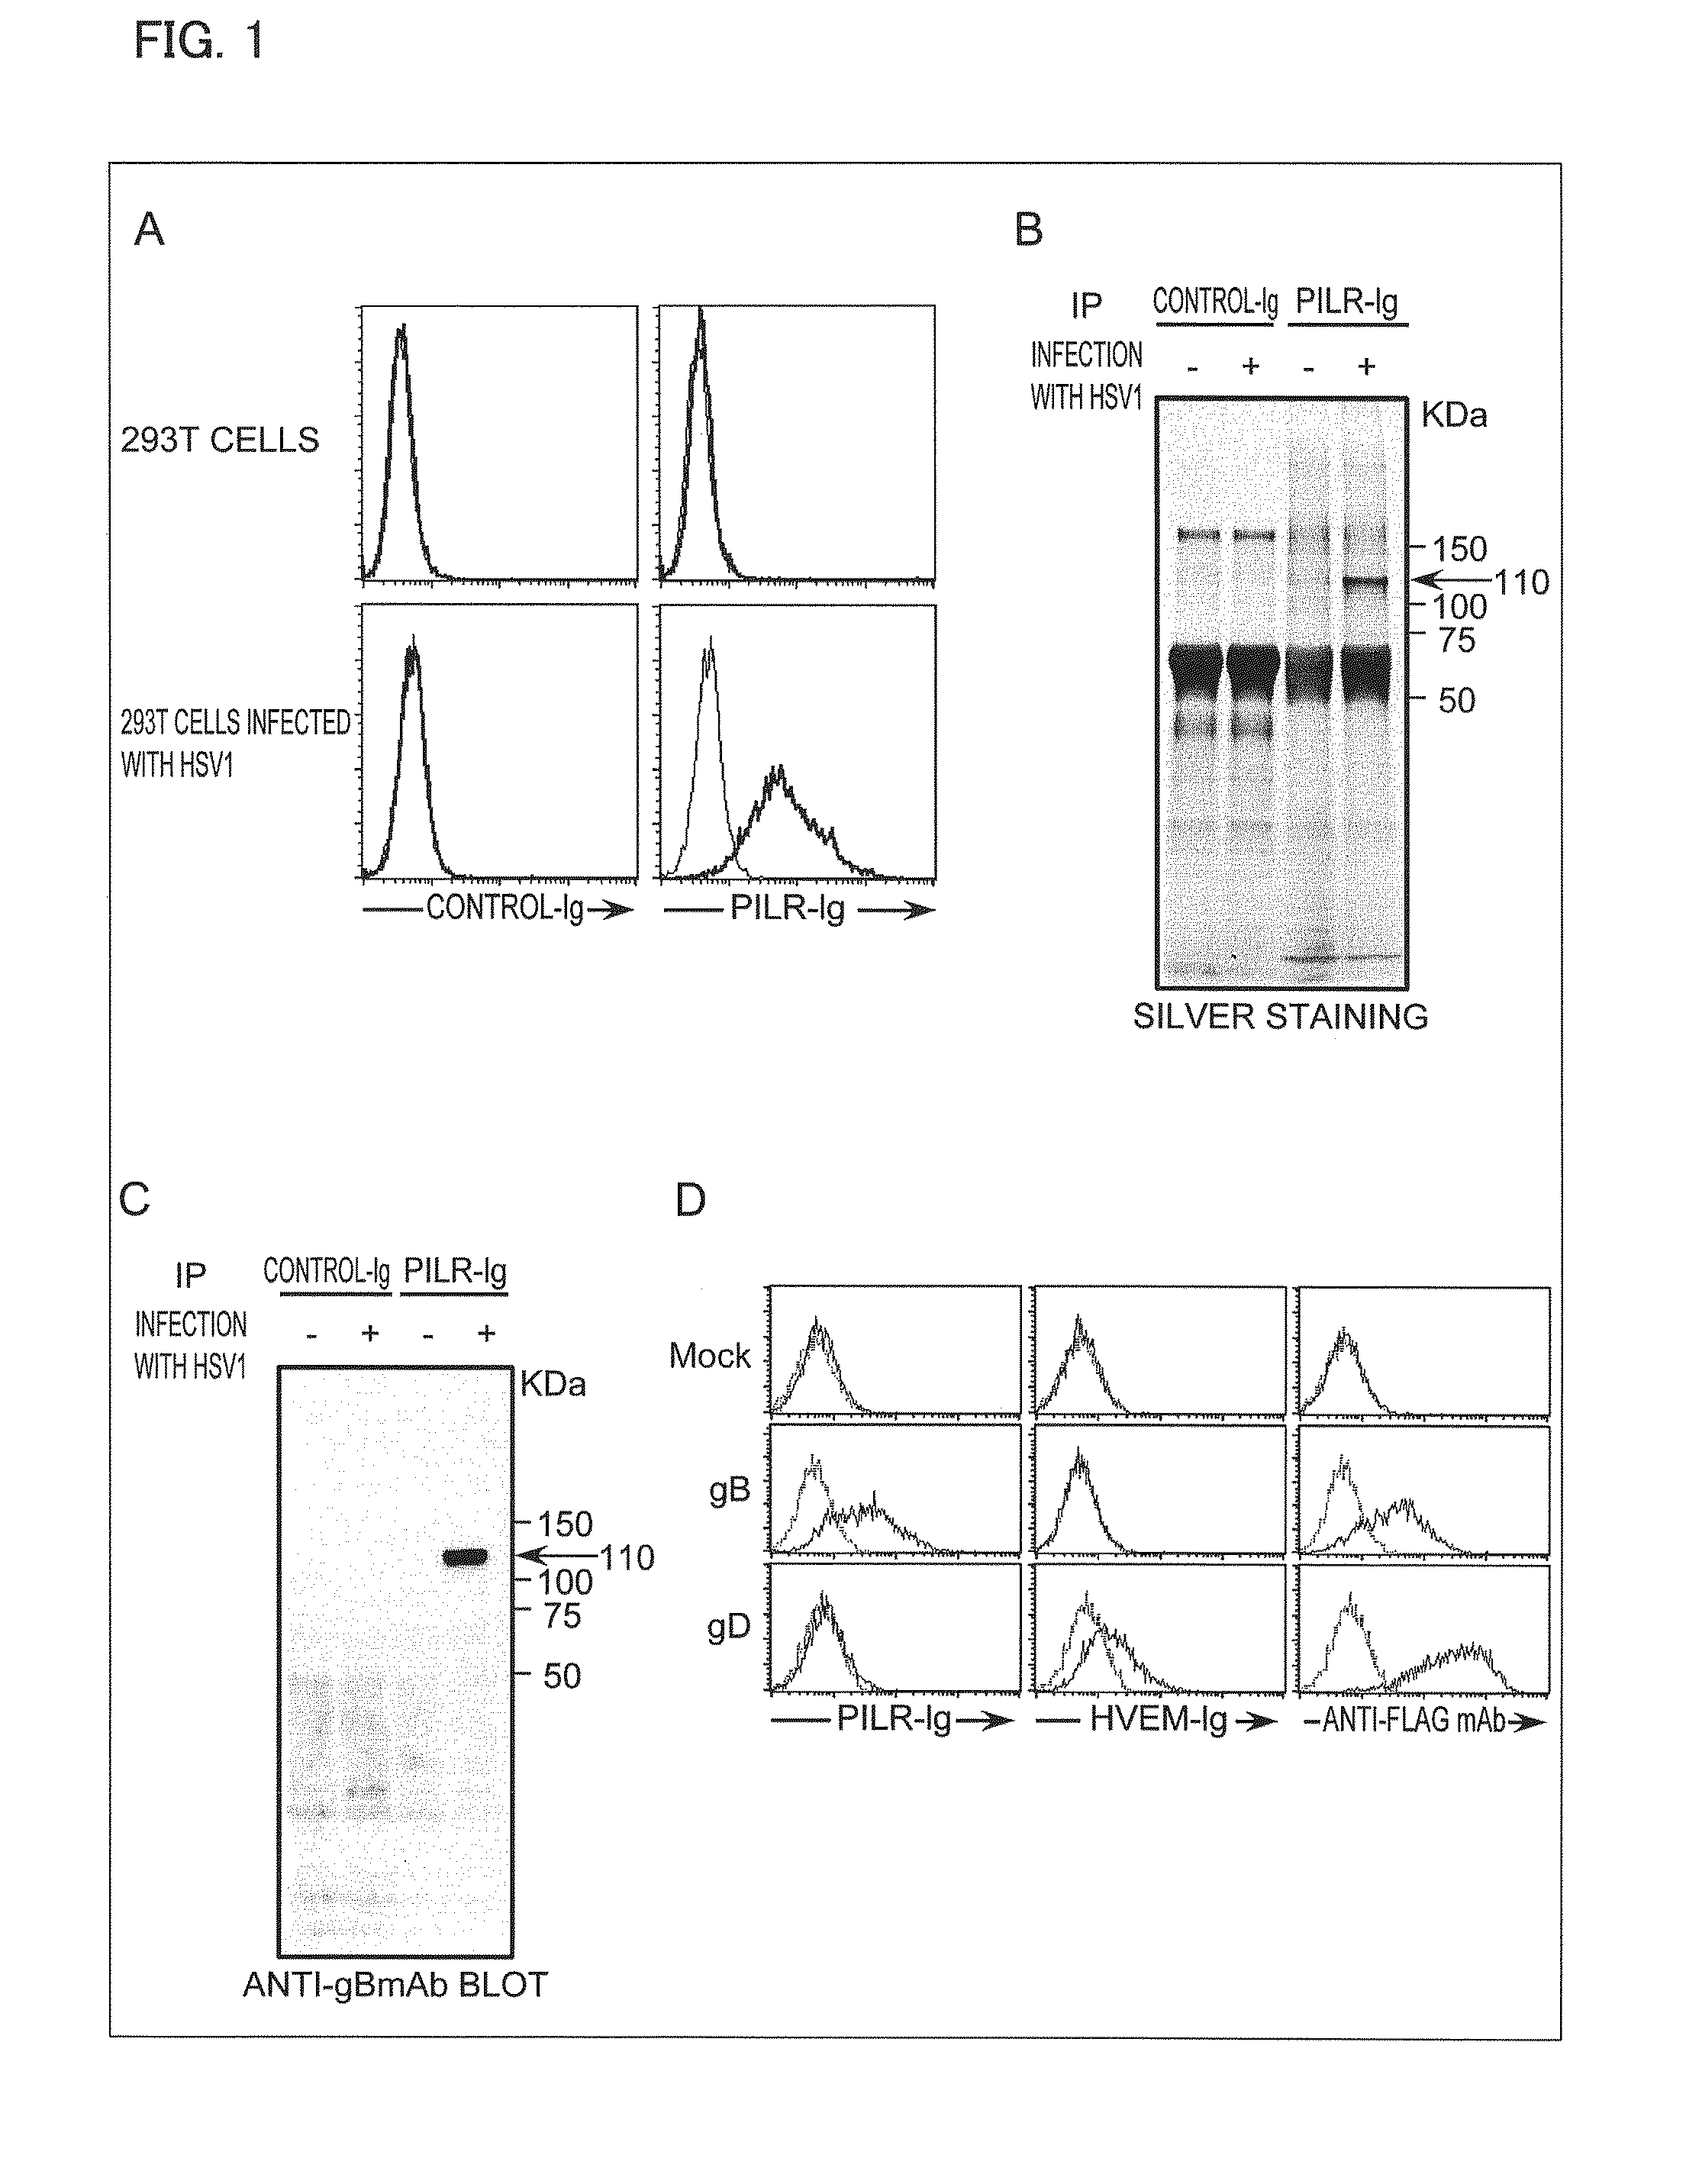 Herpes virus infection inhibitor, method for inhibiting infection with herpes virus, and use thereof